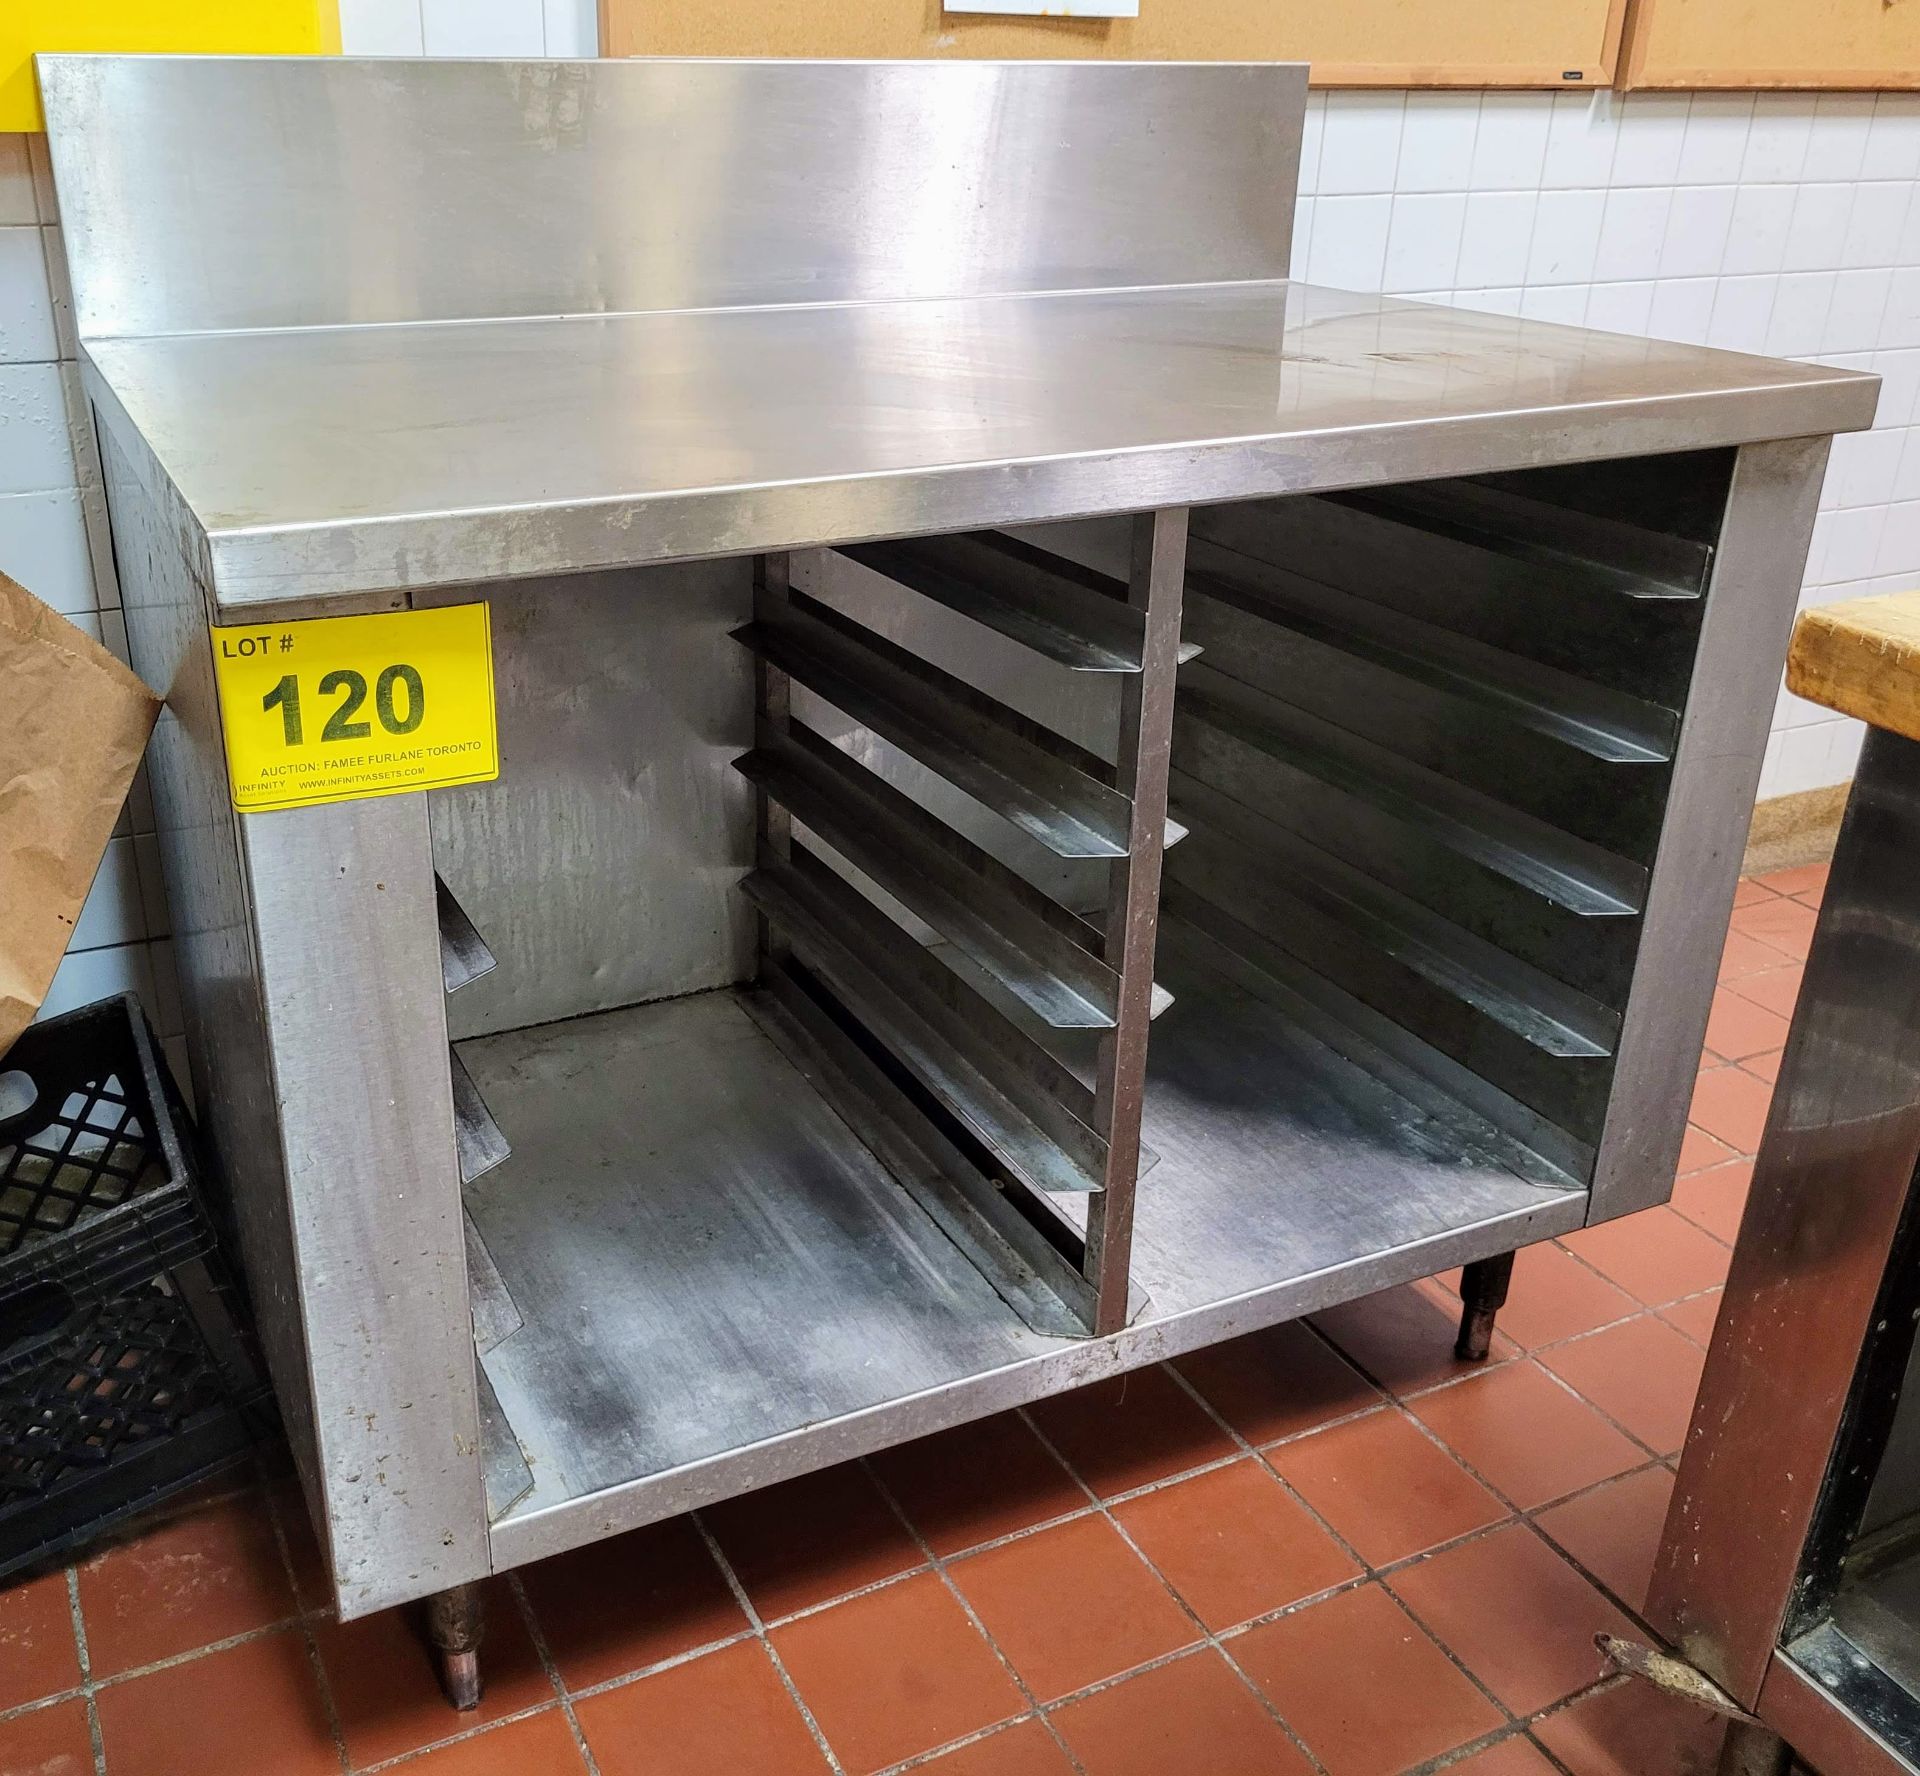 STAINLESS STEEL BAKER STATION - (46"L X 29"W X 44"H)